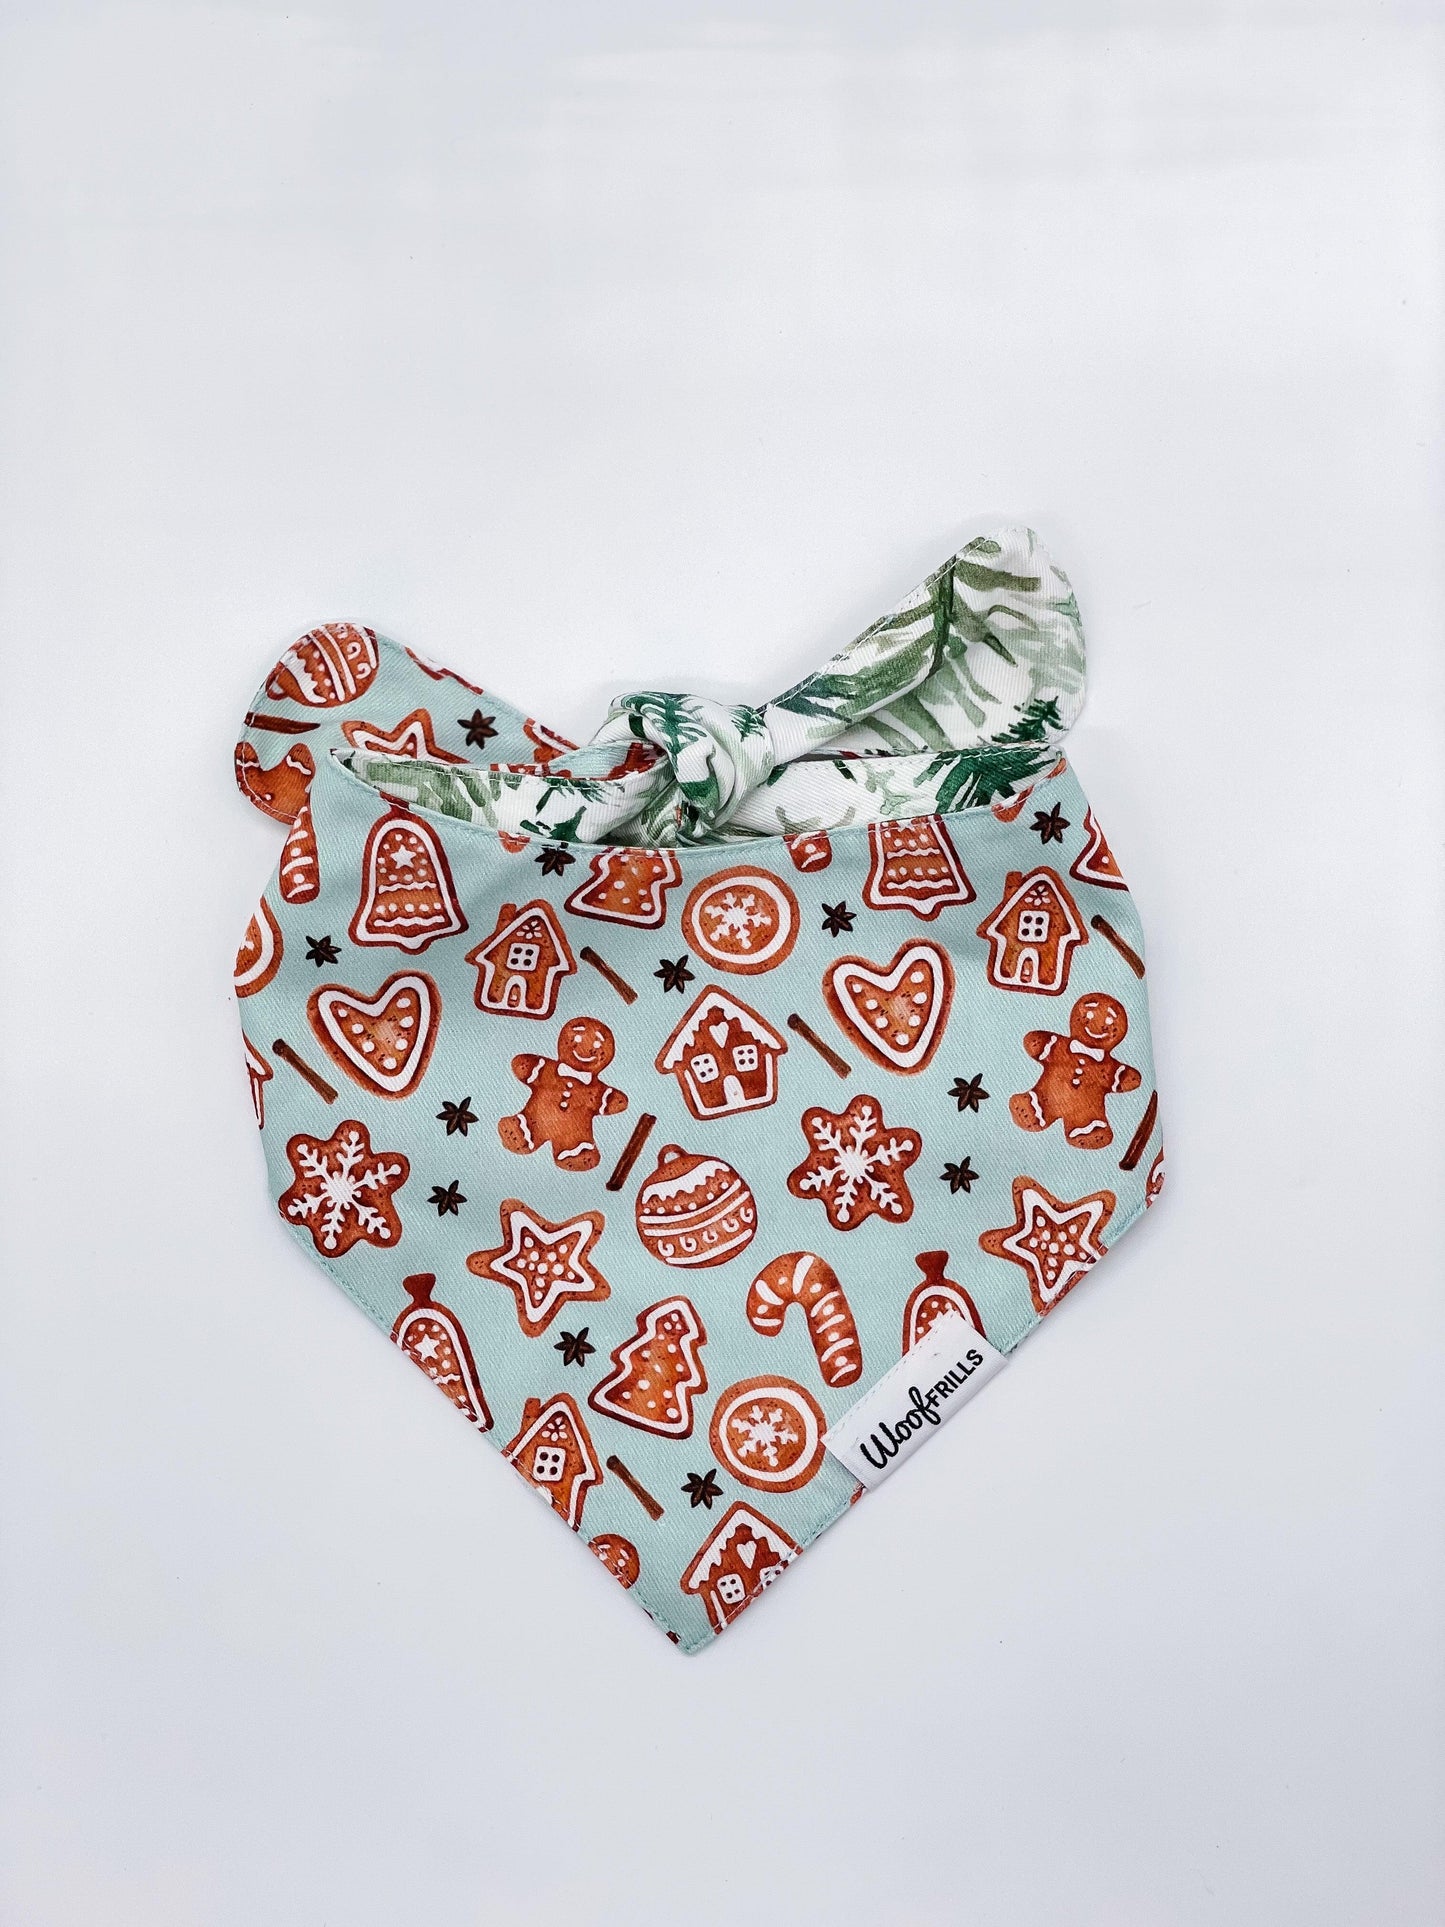 Reversible Tie-on Bandana - Pining for you - Woof Frills